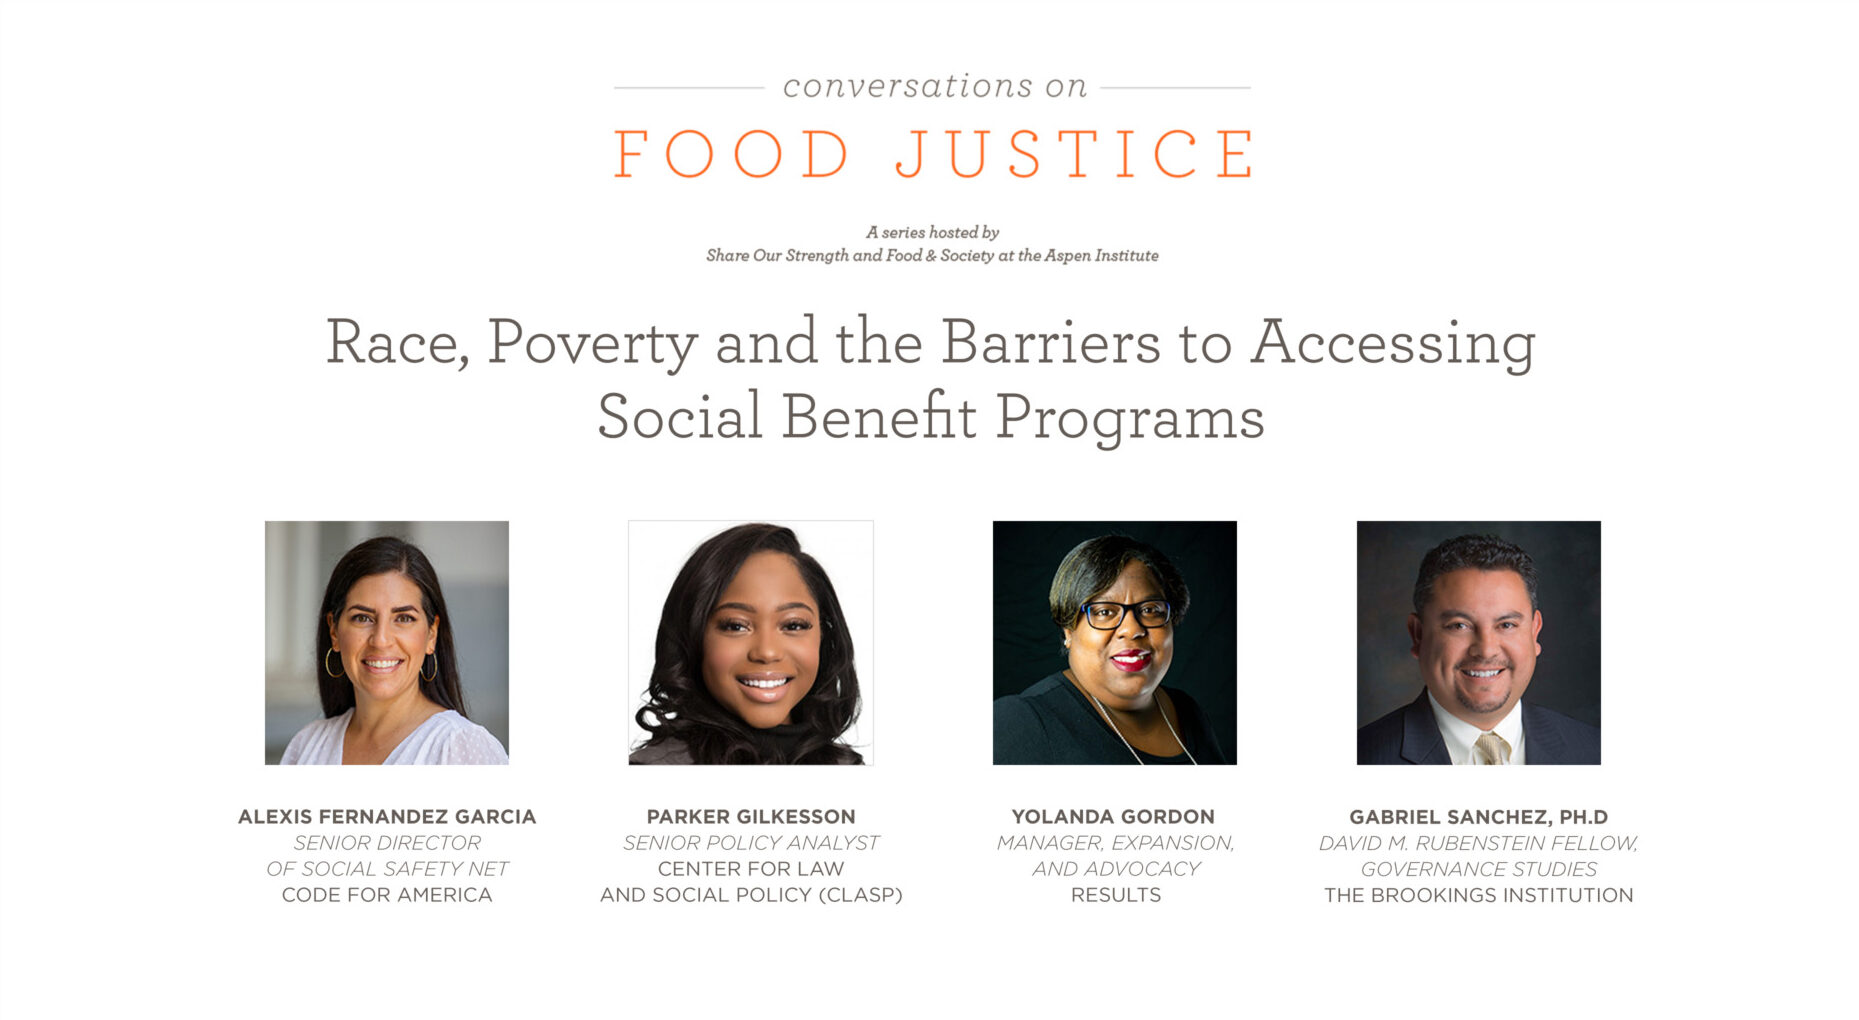 Race, Poverty, and the Barriers to Accessing Social Benefit Programs